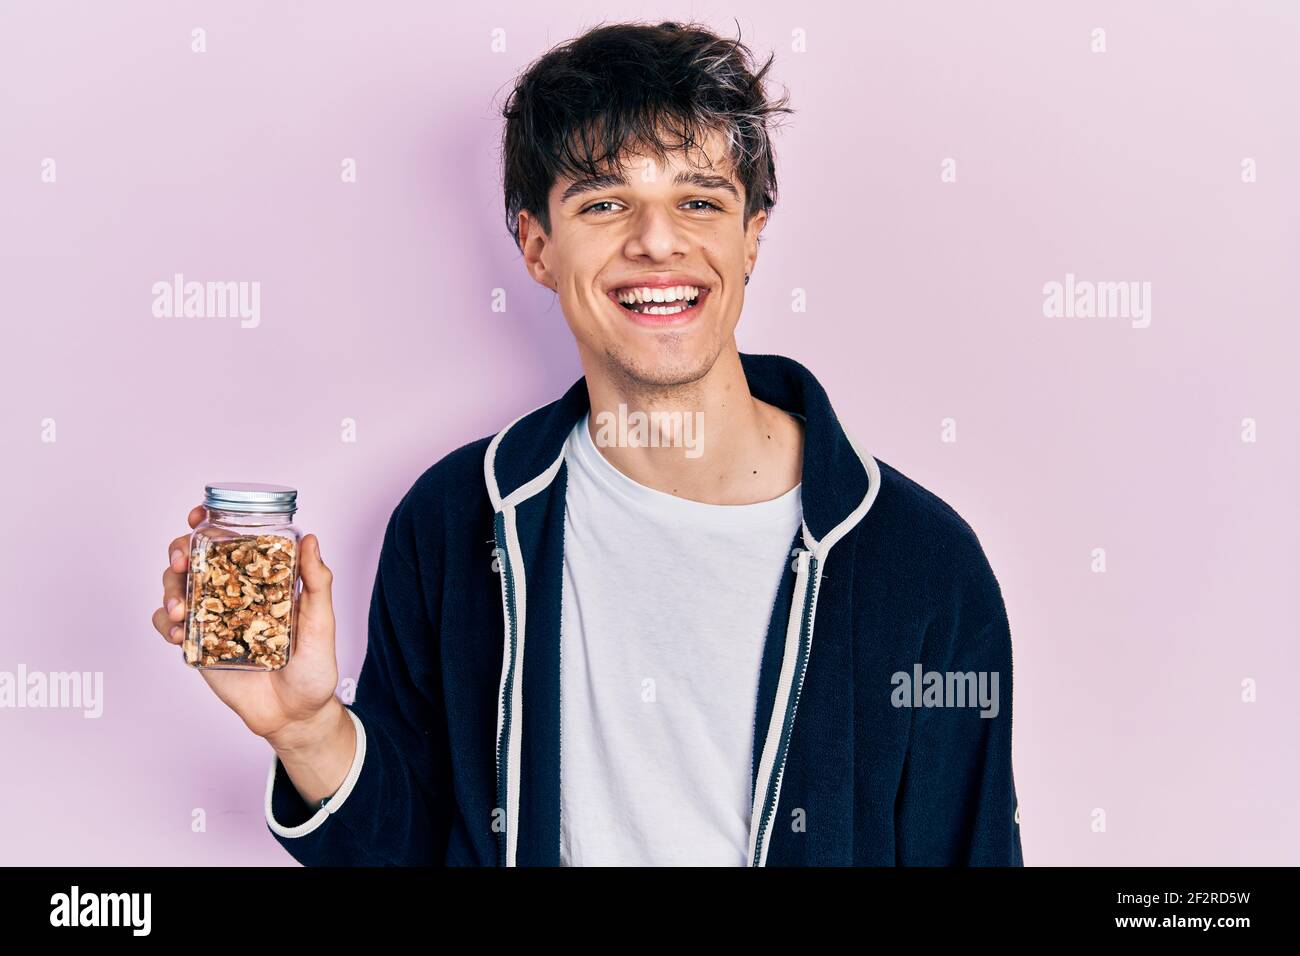 Handsome hipster young man holding walnuts looking positive and happy standing and smiling with a confident smile showing teeth Stock Photo